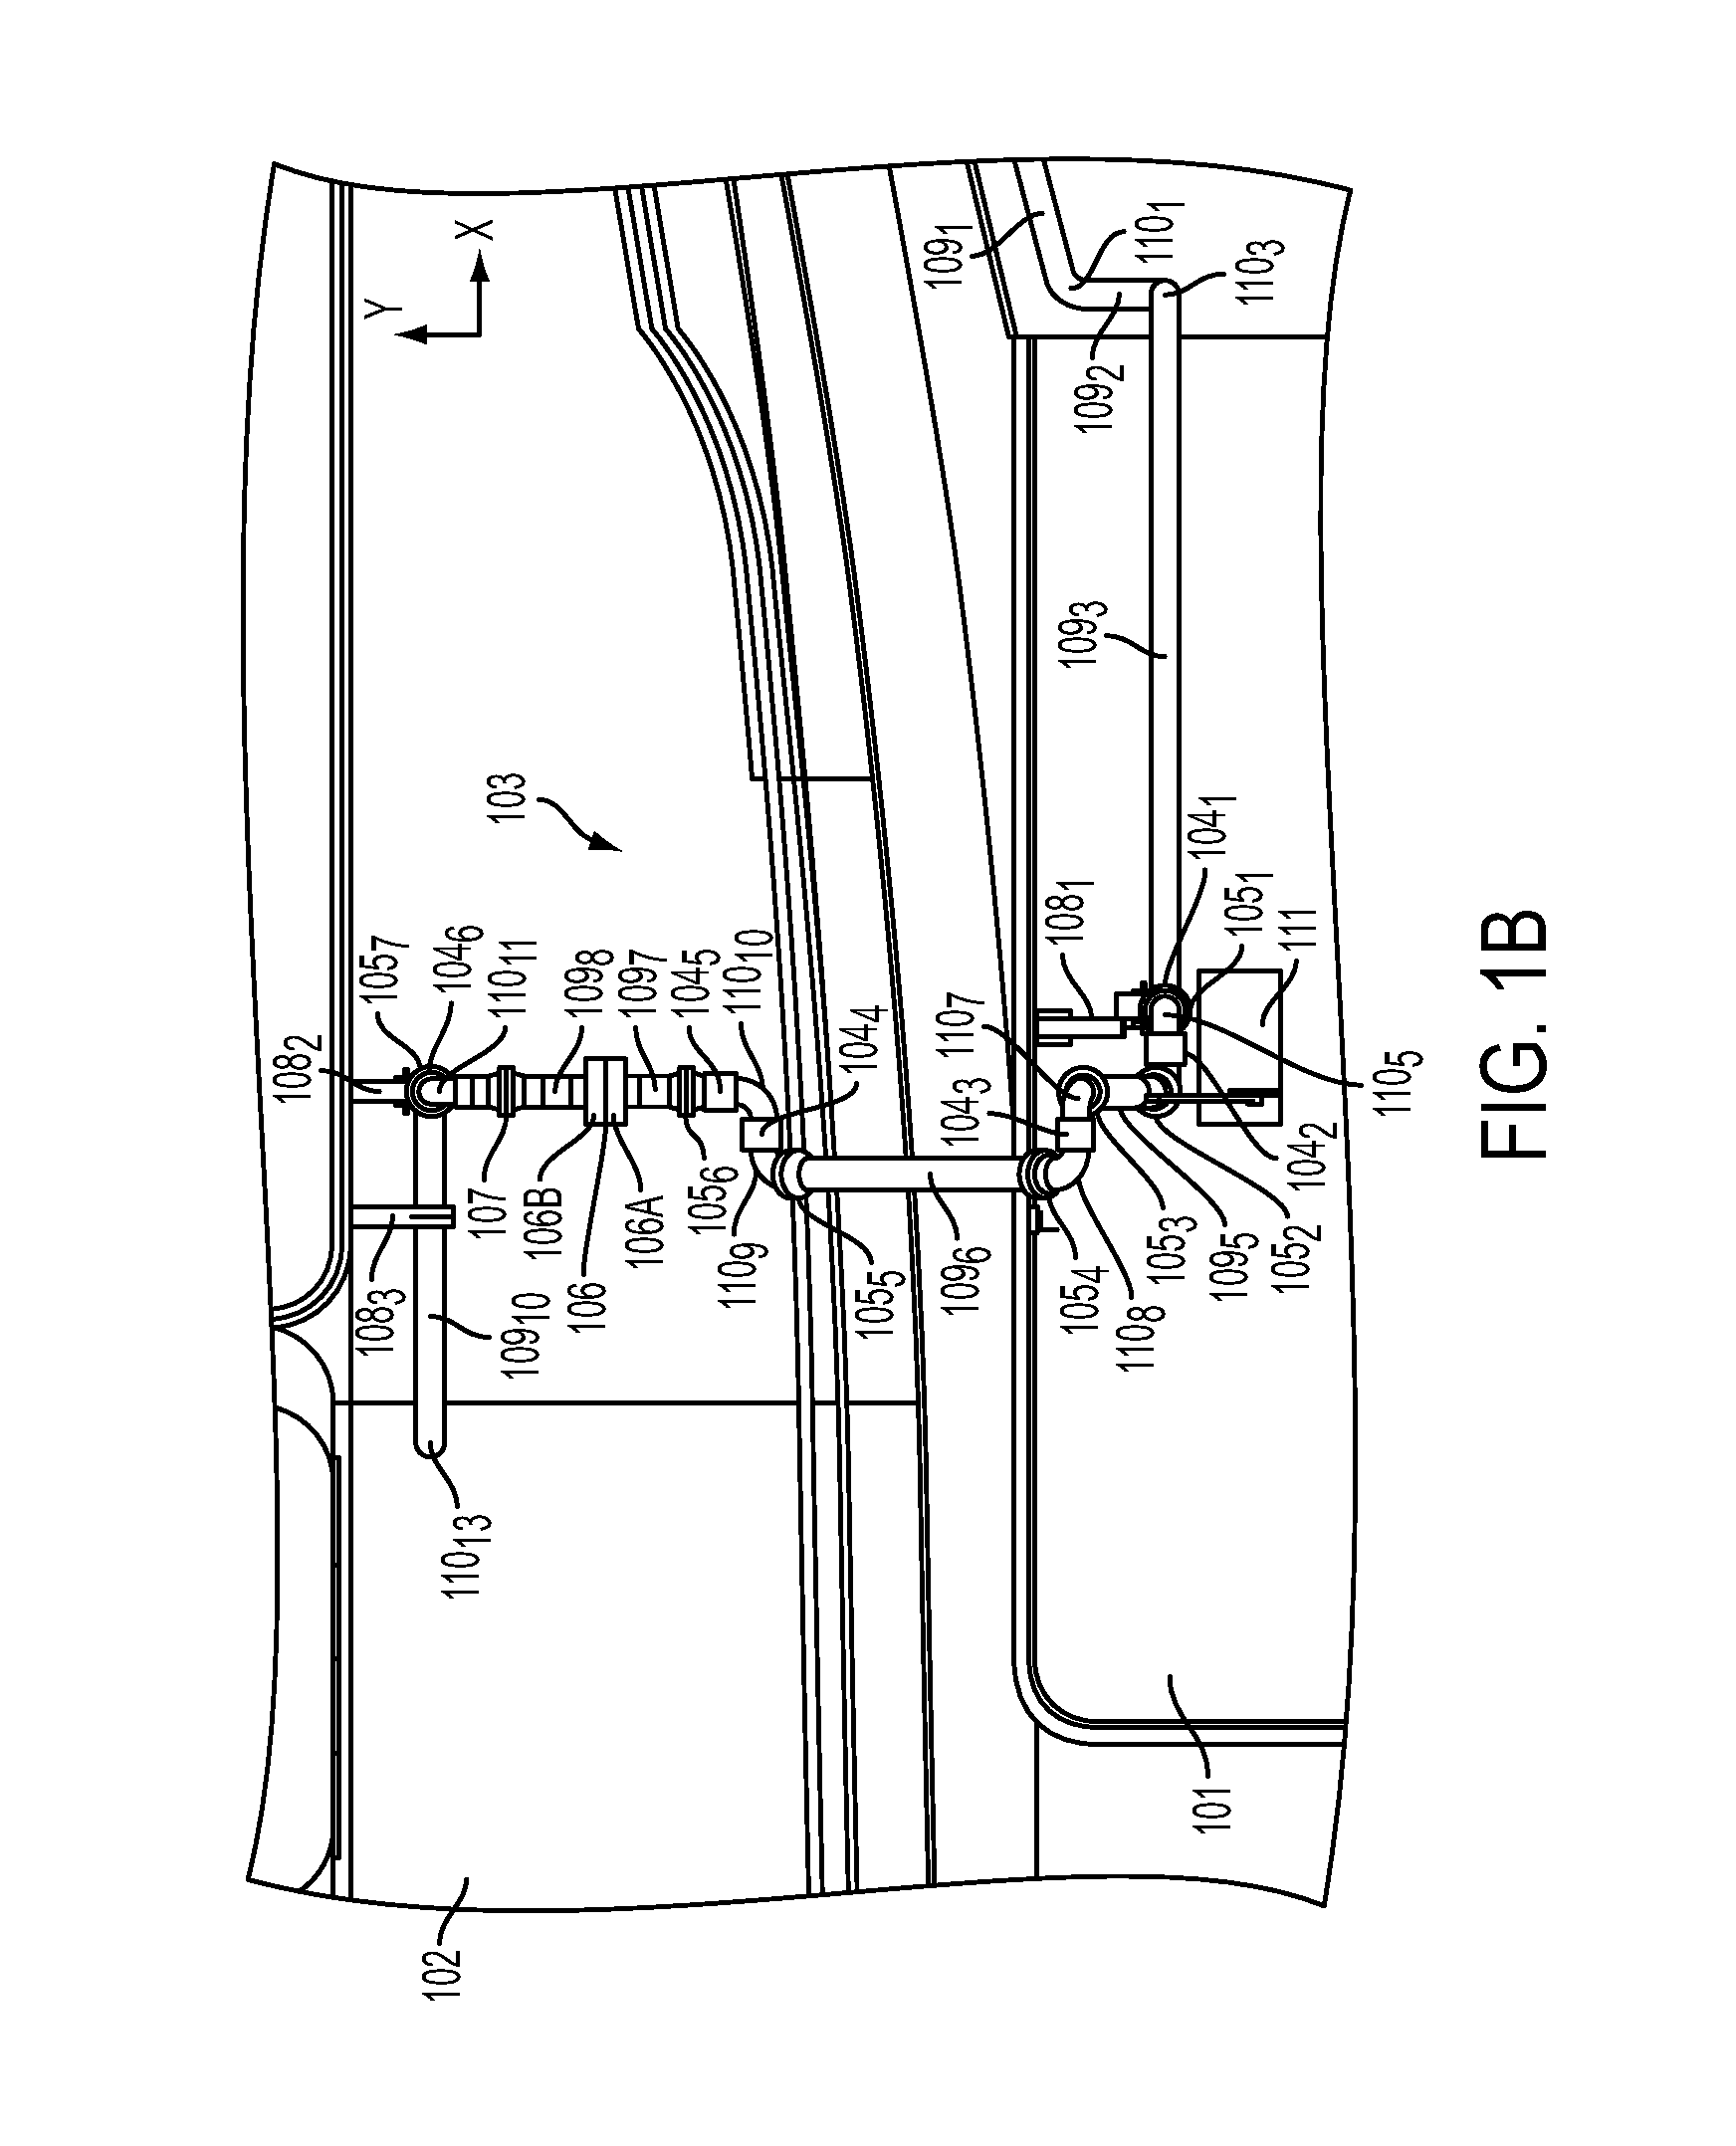 Articulated conduit systems and uses thereof for fuel gas transfer between a tug and barge